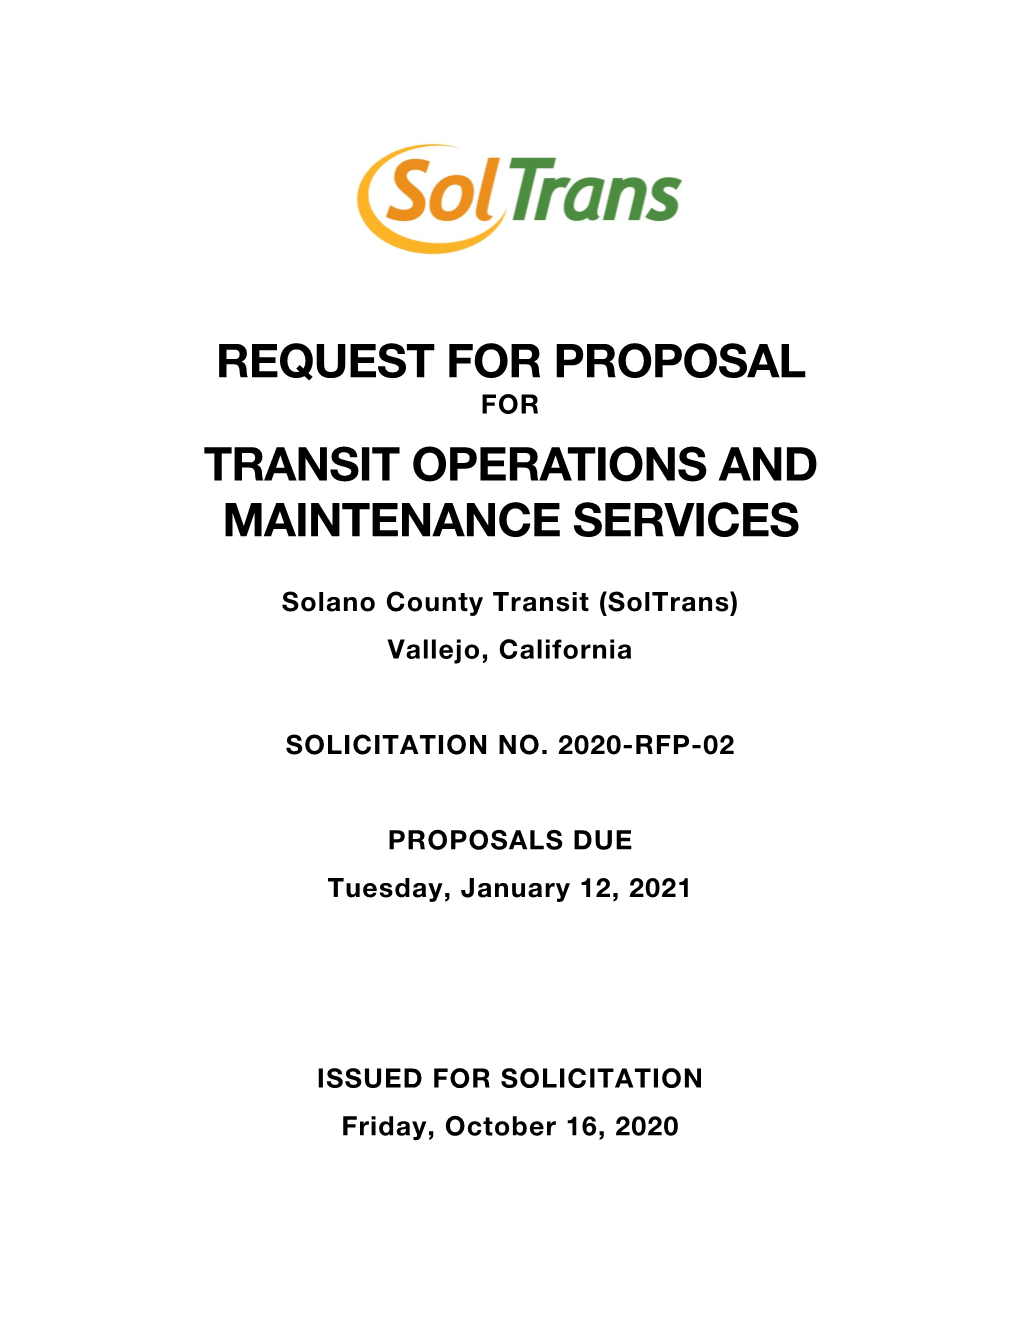 Request for Proposal for Transit Operations and Maintenance Services